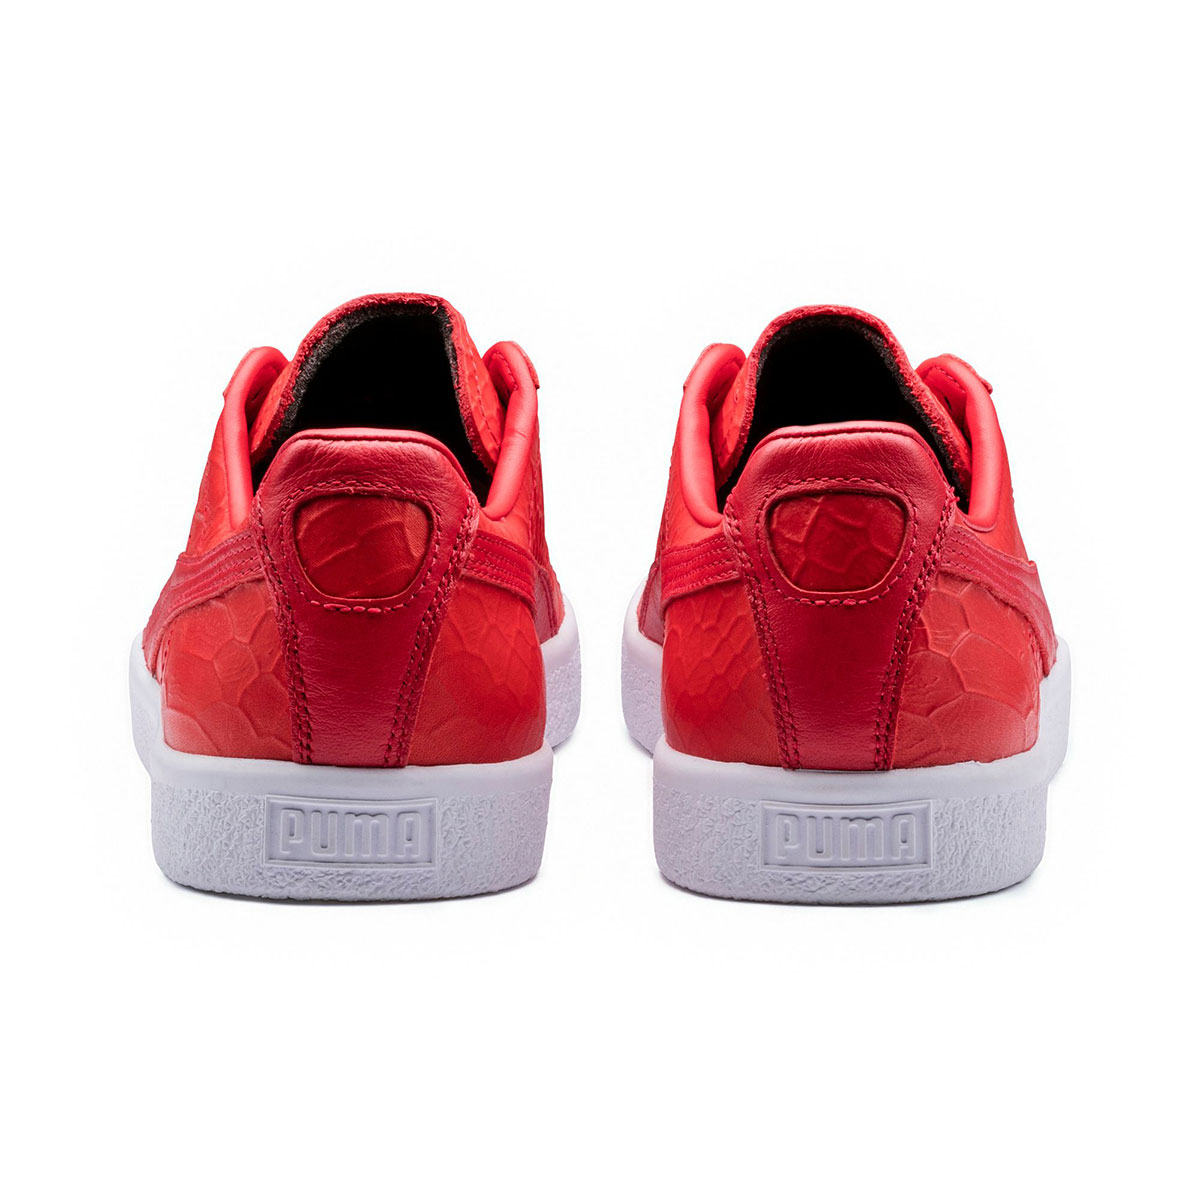 Puma Clyde Dressed red  361704-03